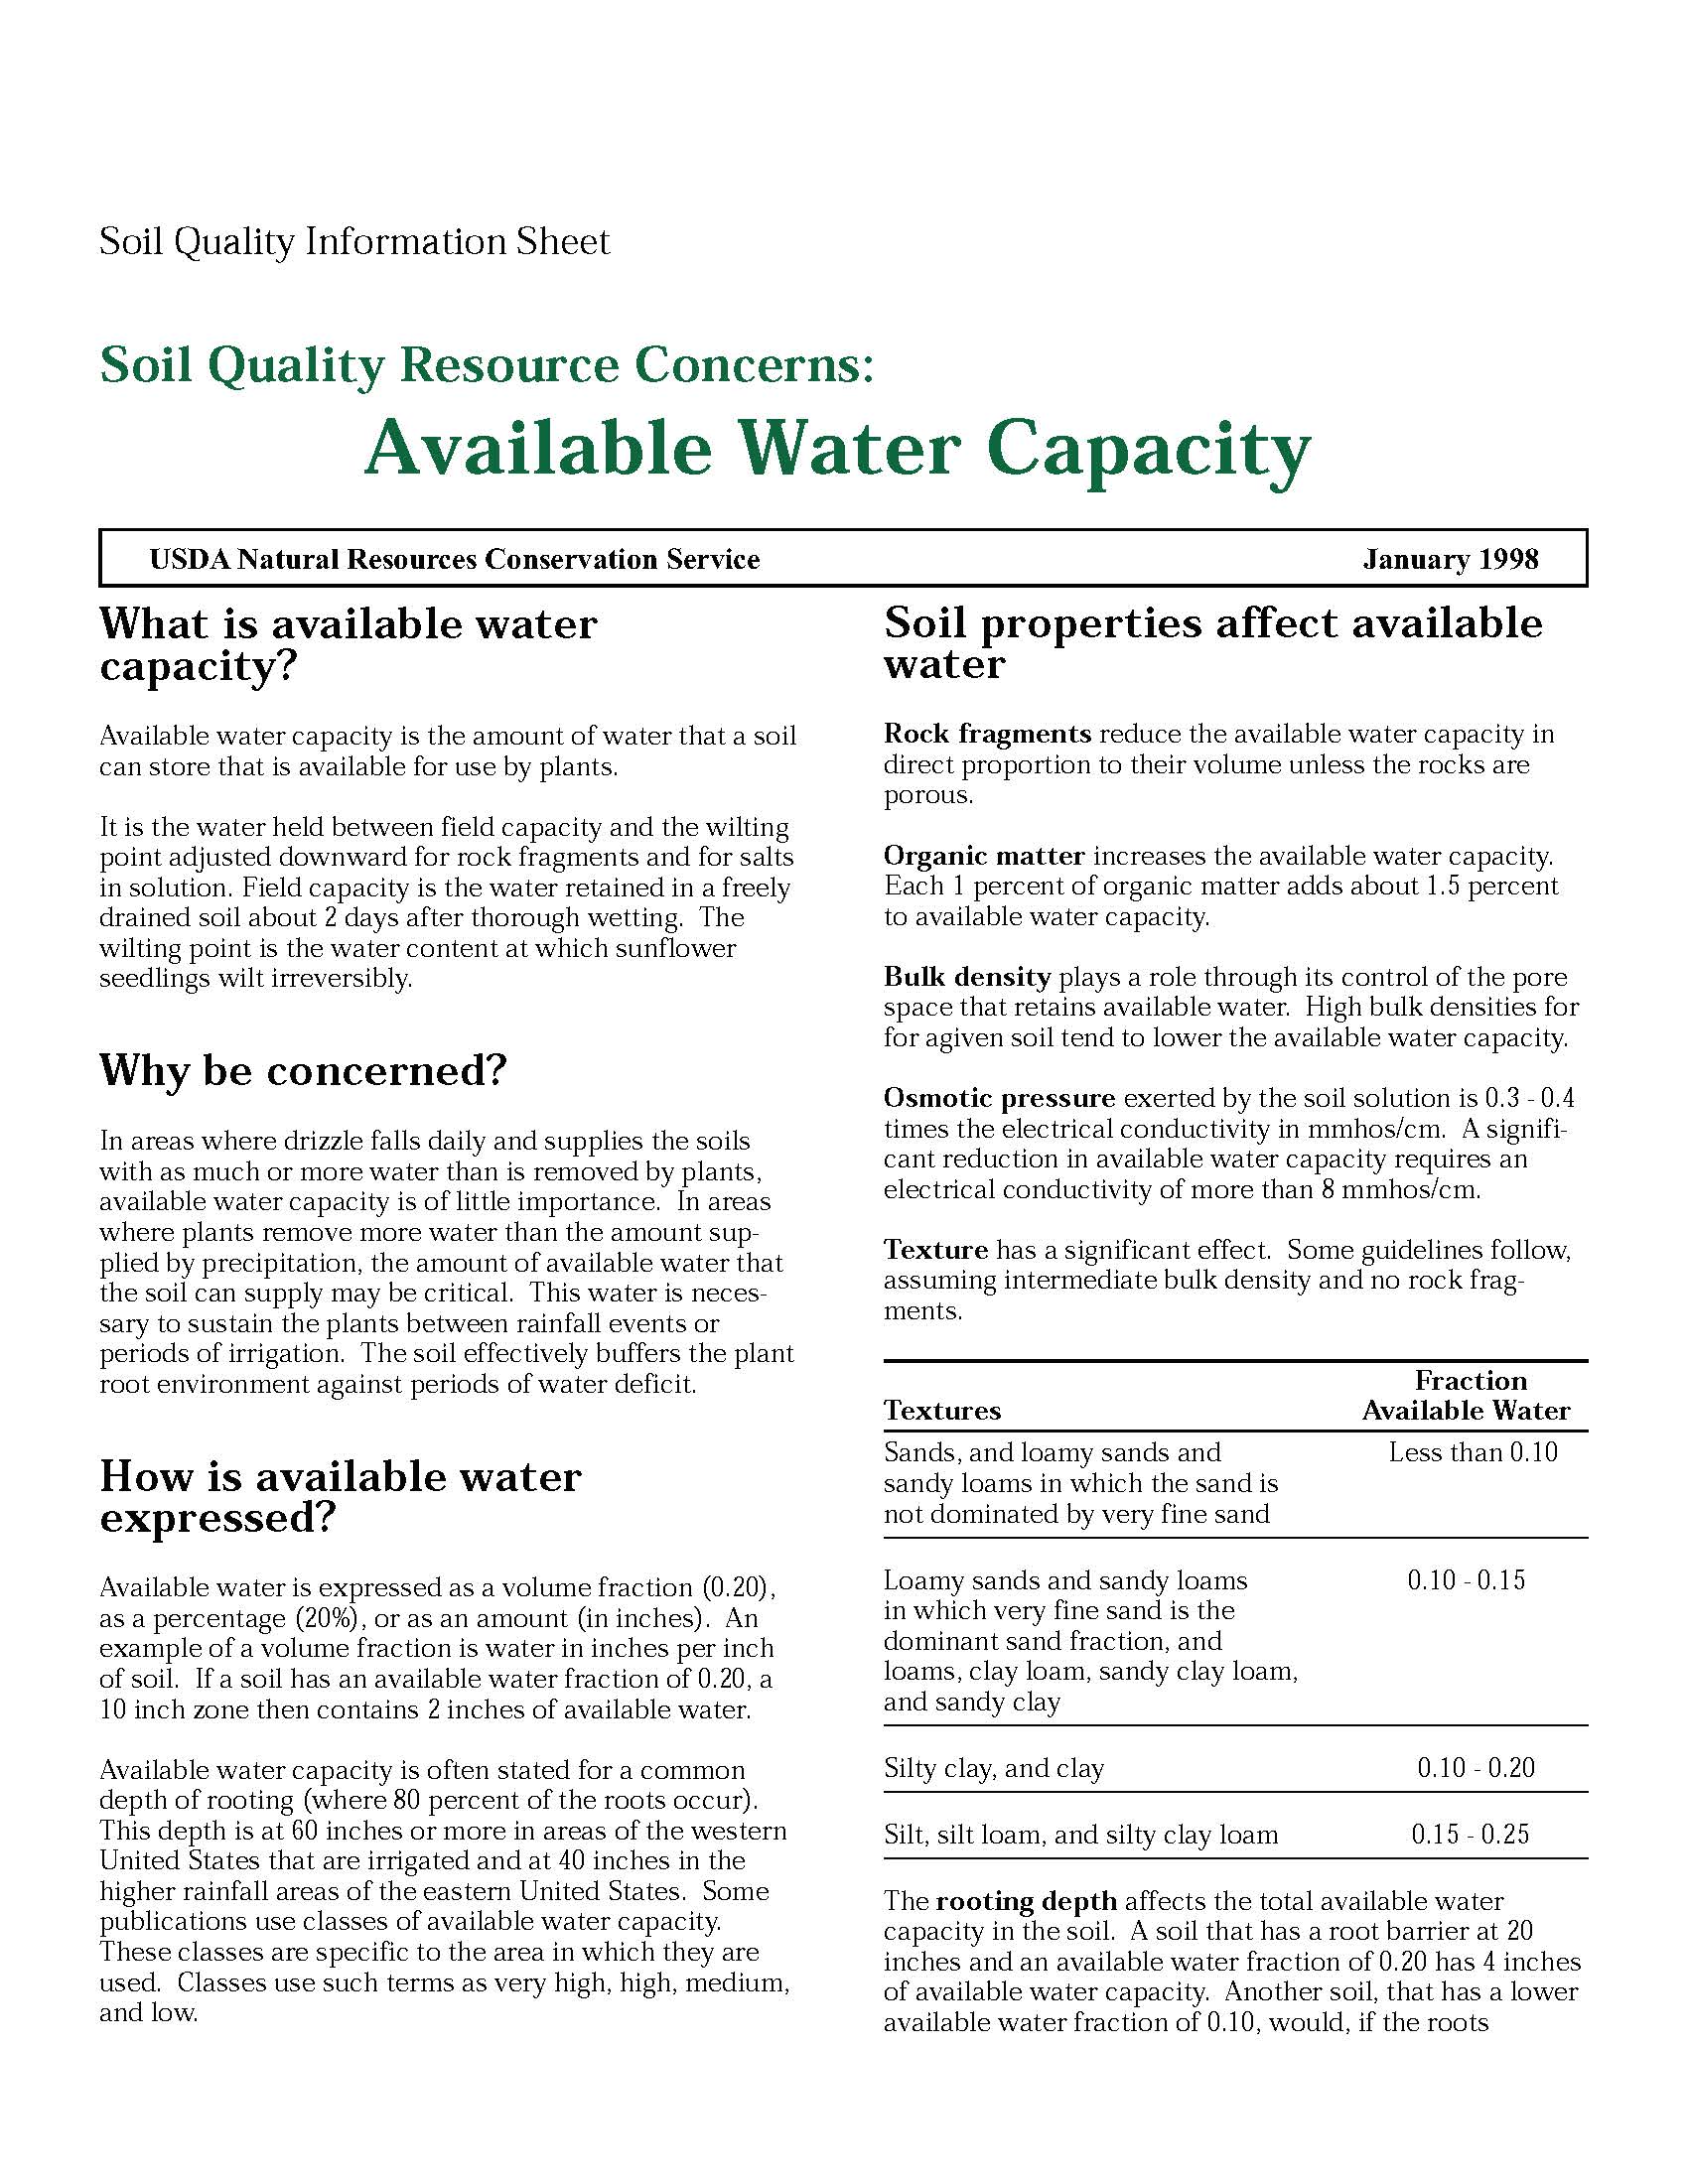 SQ-Resource Concerns-Available Water Capacity